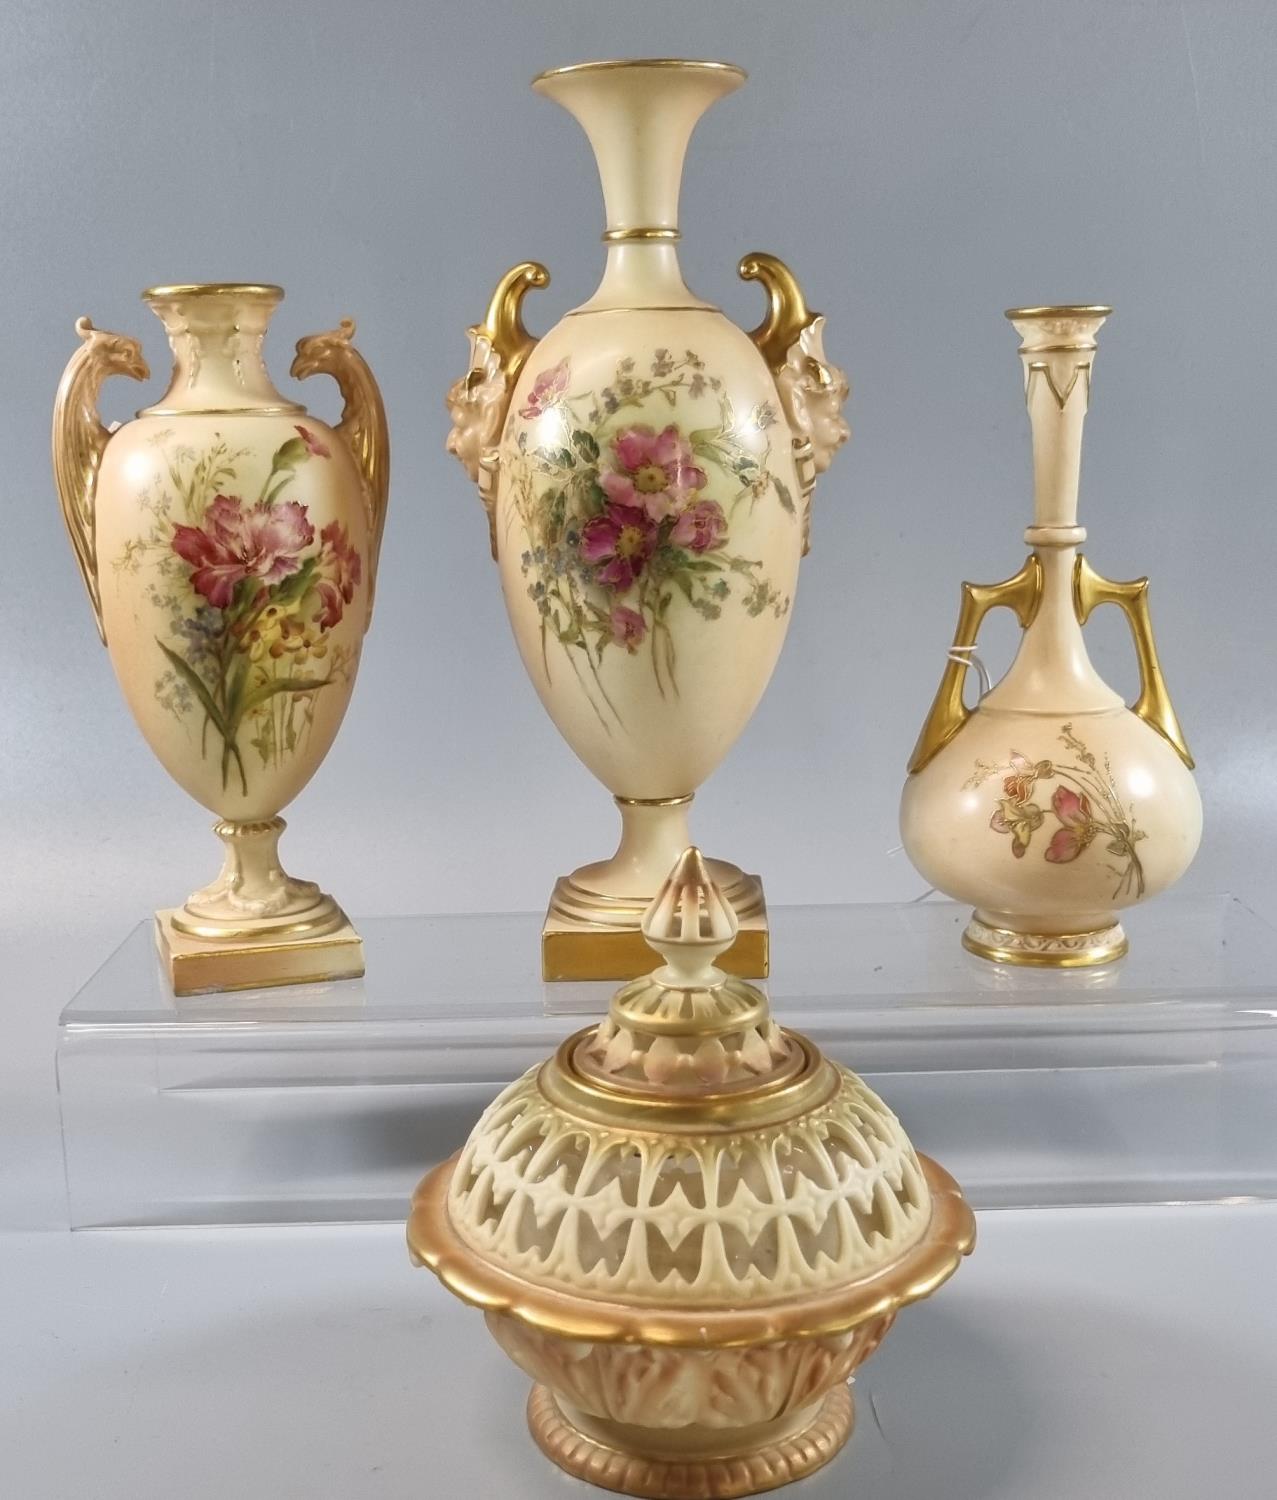 Collection of Worcester ivory blush porcelain items, mainly decorated with floral sprays and foliage